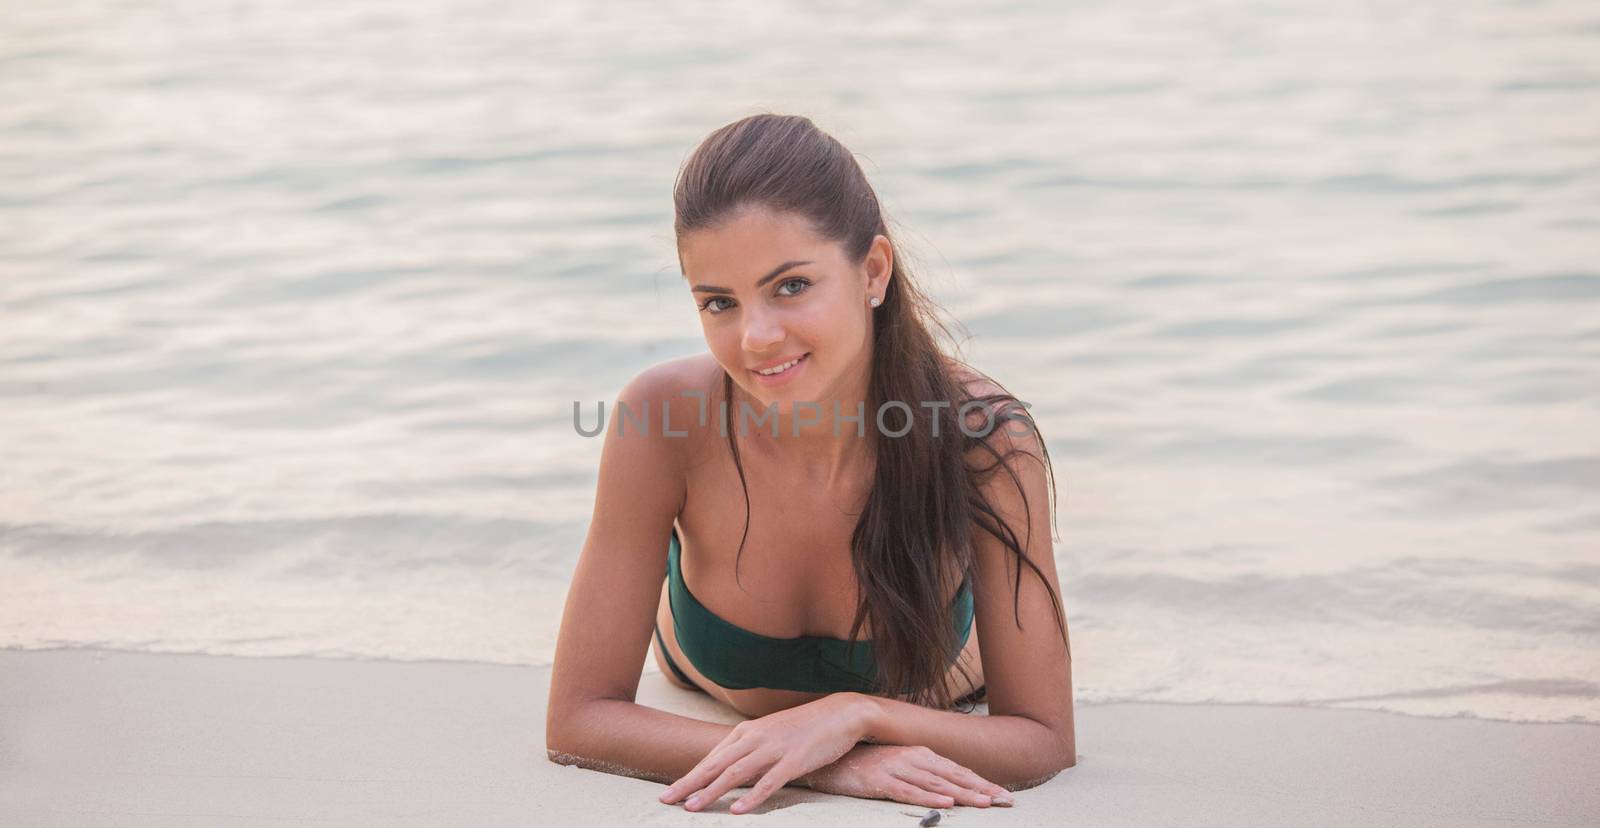 Woman in bikini relaxing on the beach at sunset time. Travel in Thailand, Summer and vacation concept